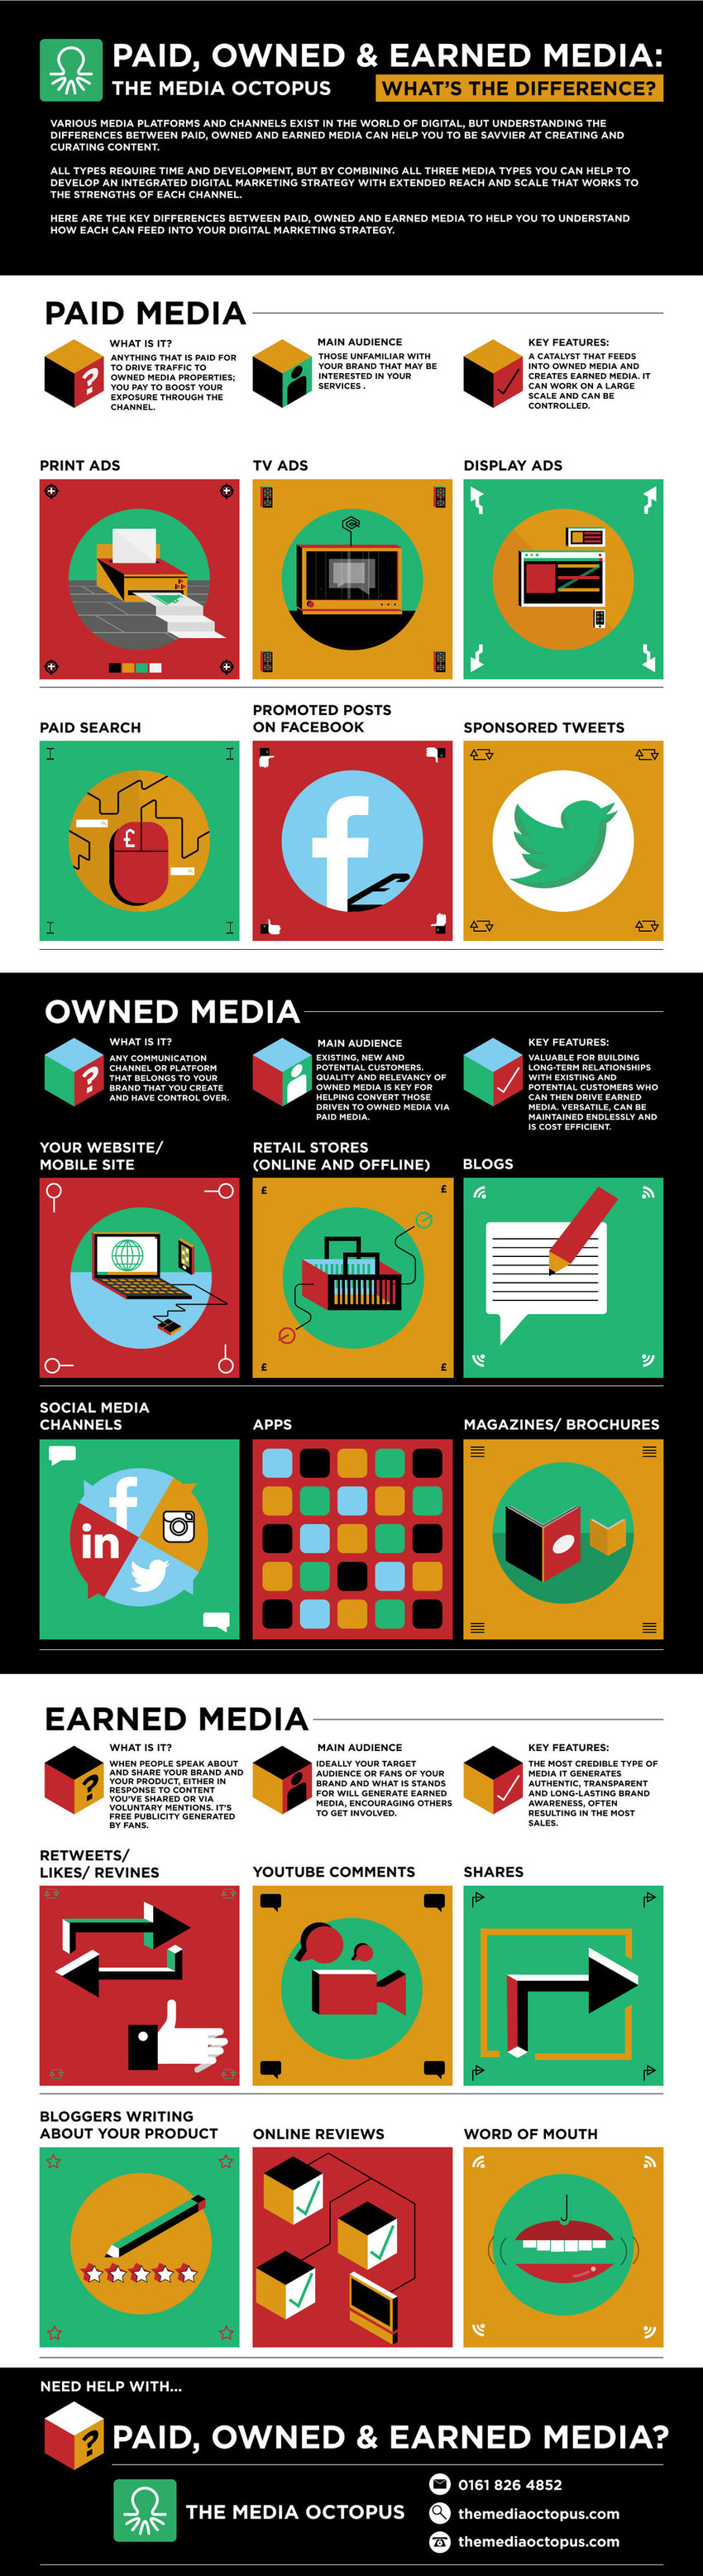 Paid, Owned & Earned Media - What's the Difference? [Infographic] - B2B Infographic | The MarTech Digest | Scoop.it